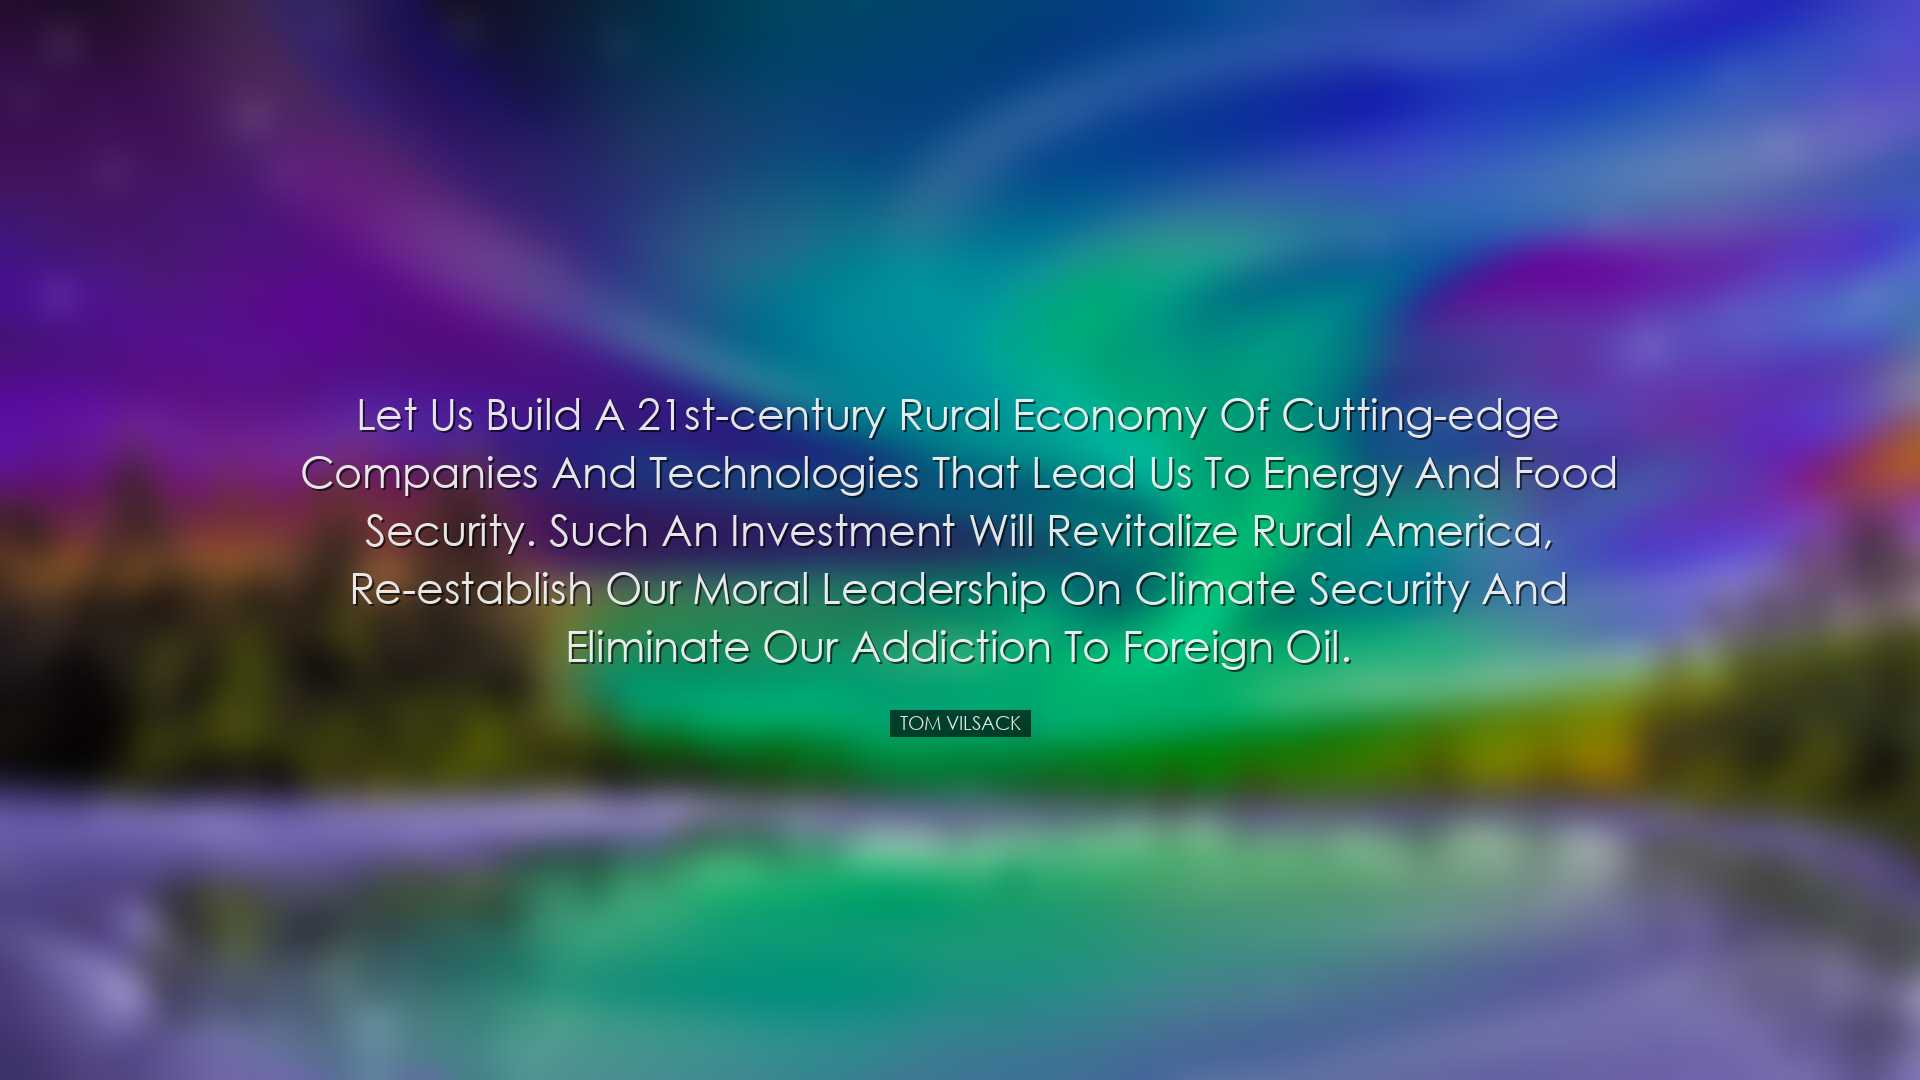 Let us build a 21st-century rural economy of cutting-edge companie